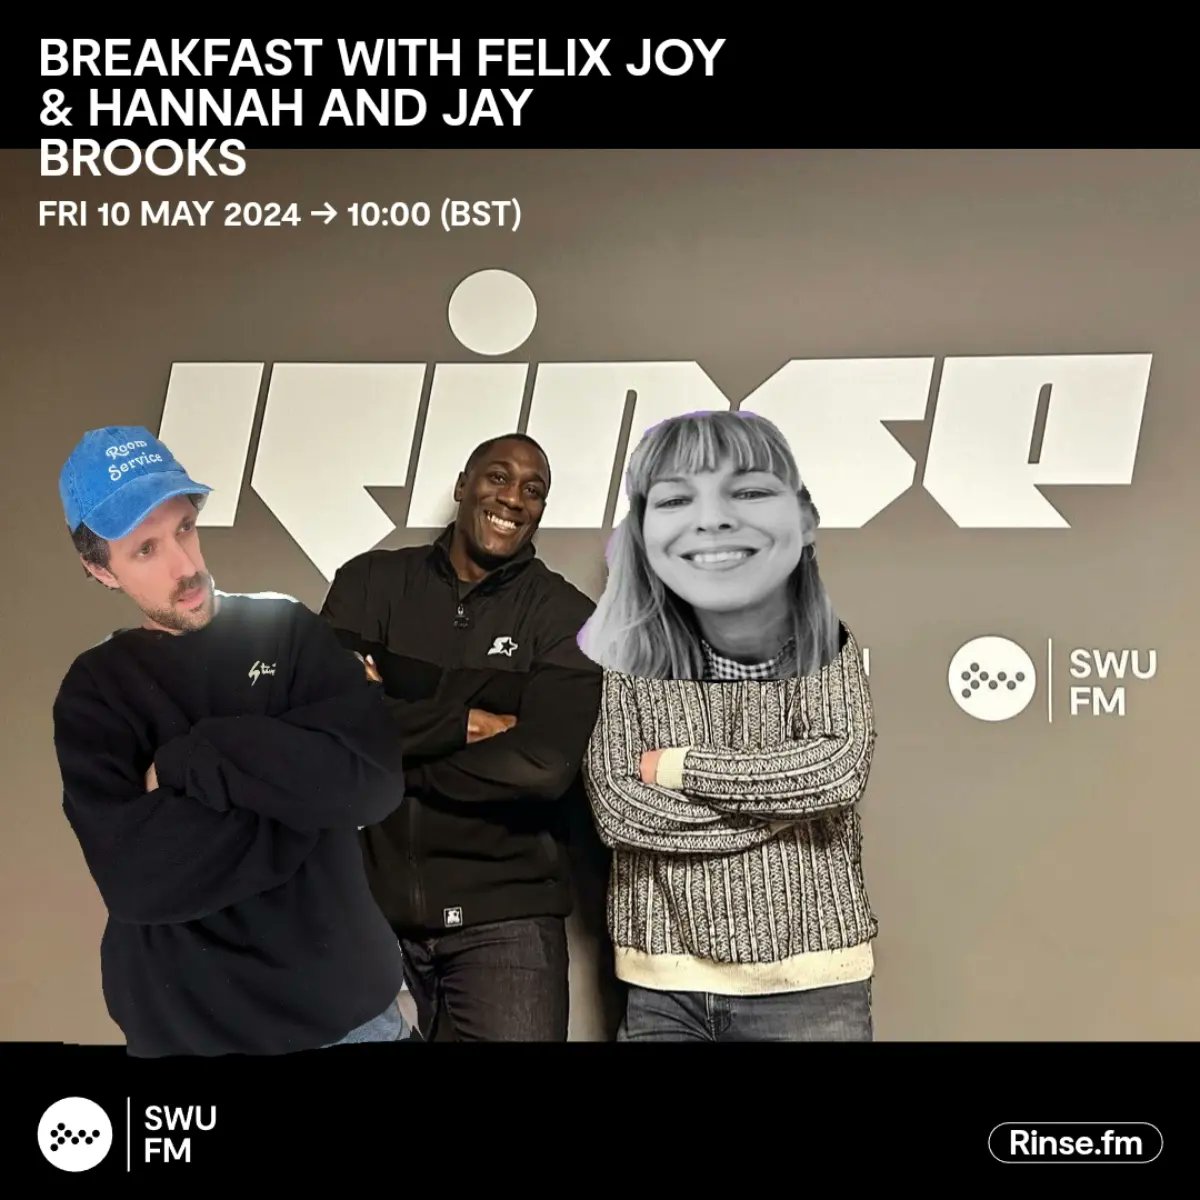 Live it's: Breakfast with Felix Joy & Hannah and Jay Brooks - Bristol's hottest married DJ duo in to get your Friday in 5th gear!! Rinse.FM 103.7FM & DAB #SWUFM